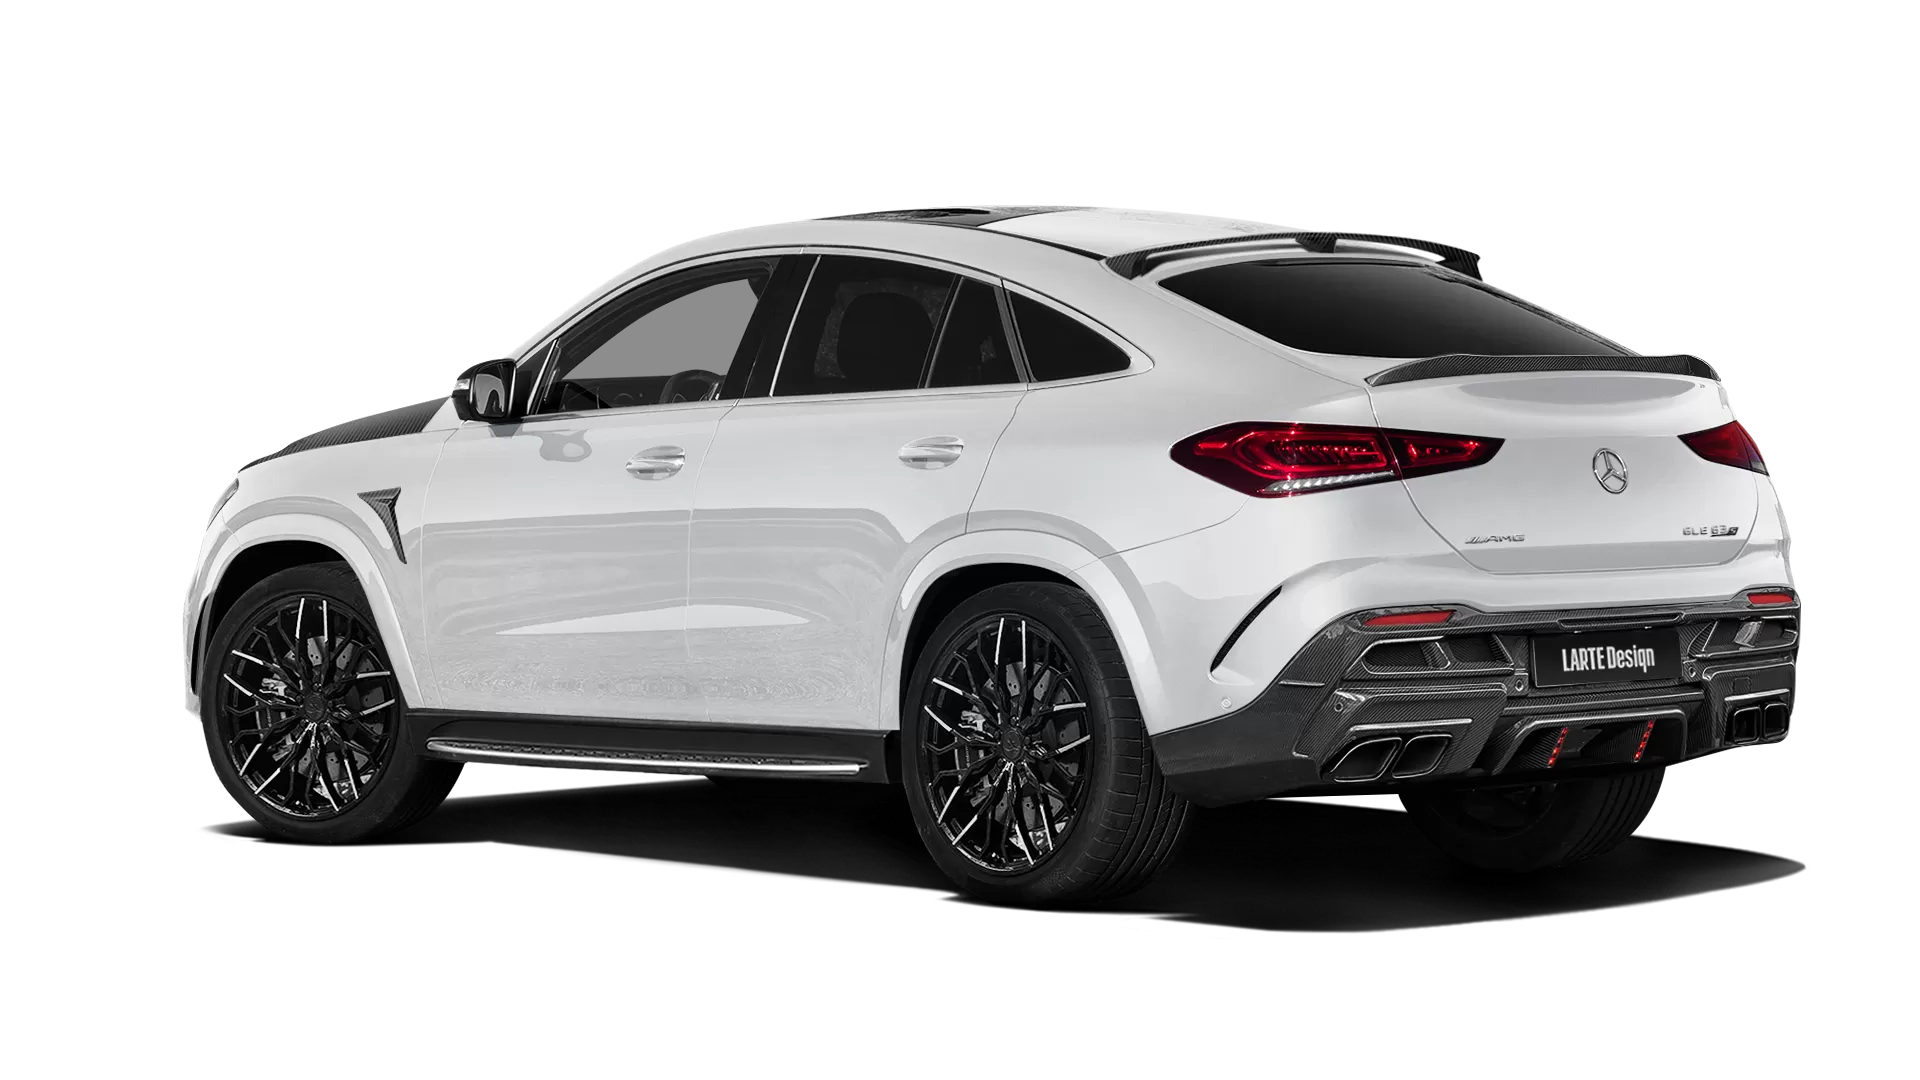 Mercedes GLE Coupe AMG 63 C167 with carbon body kit: back view shown in Polar White